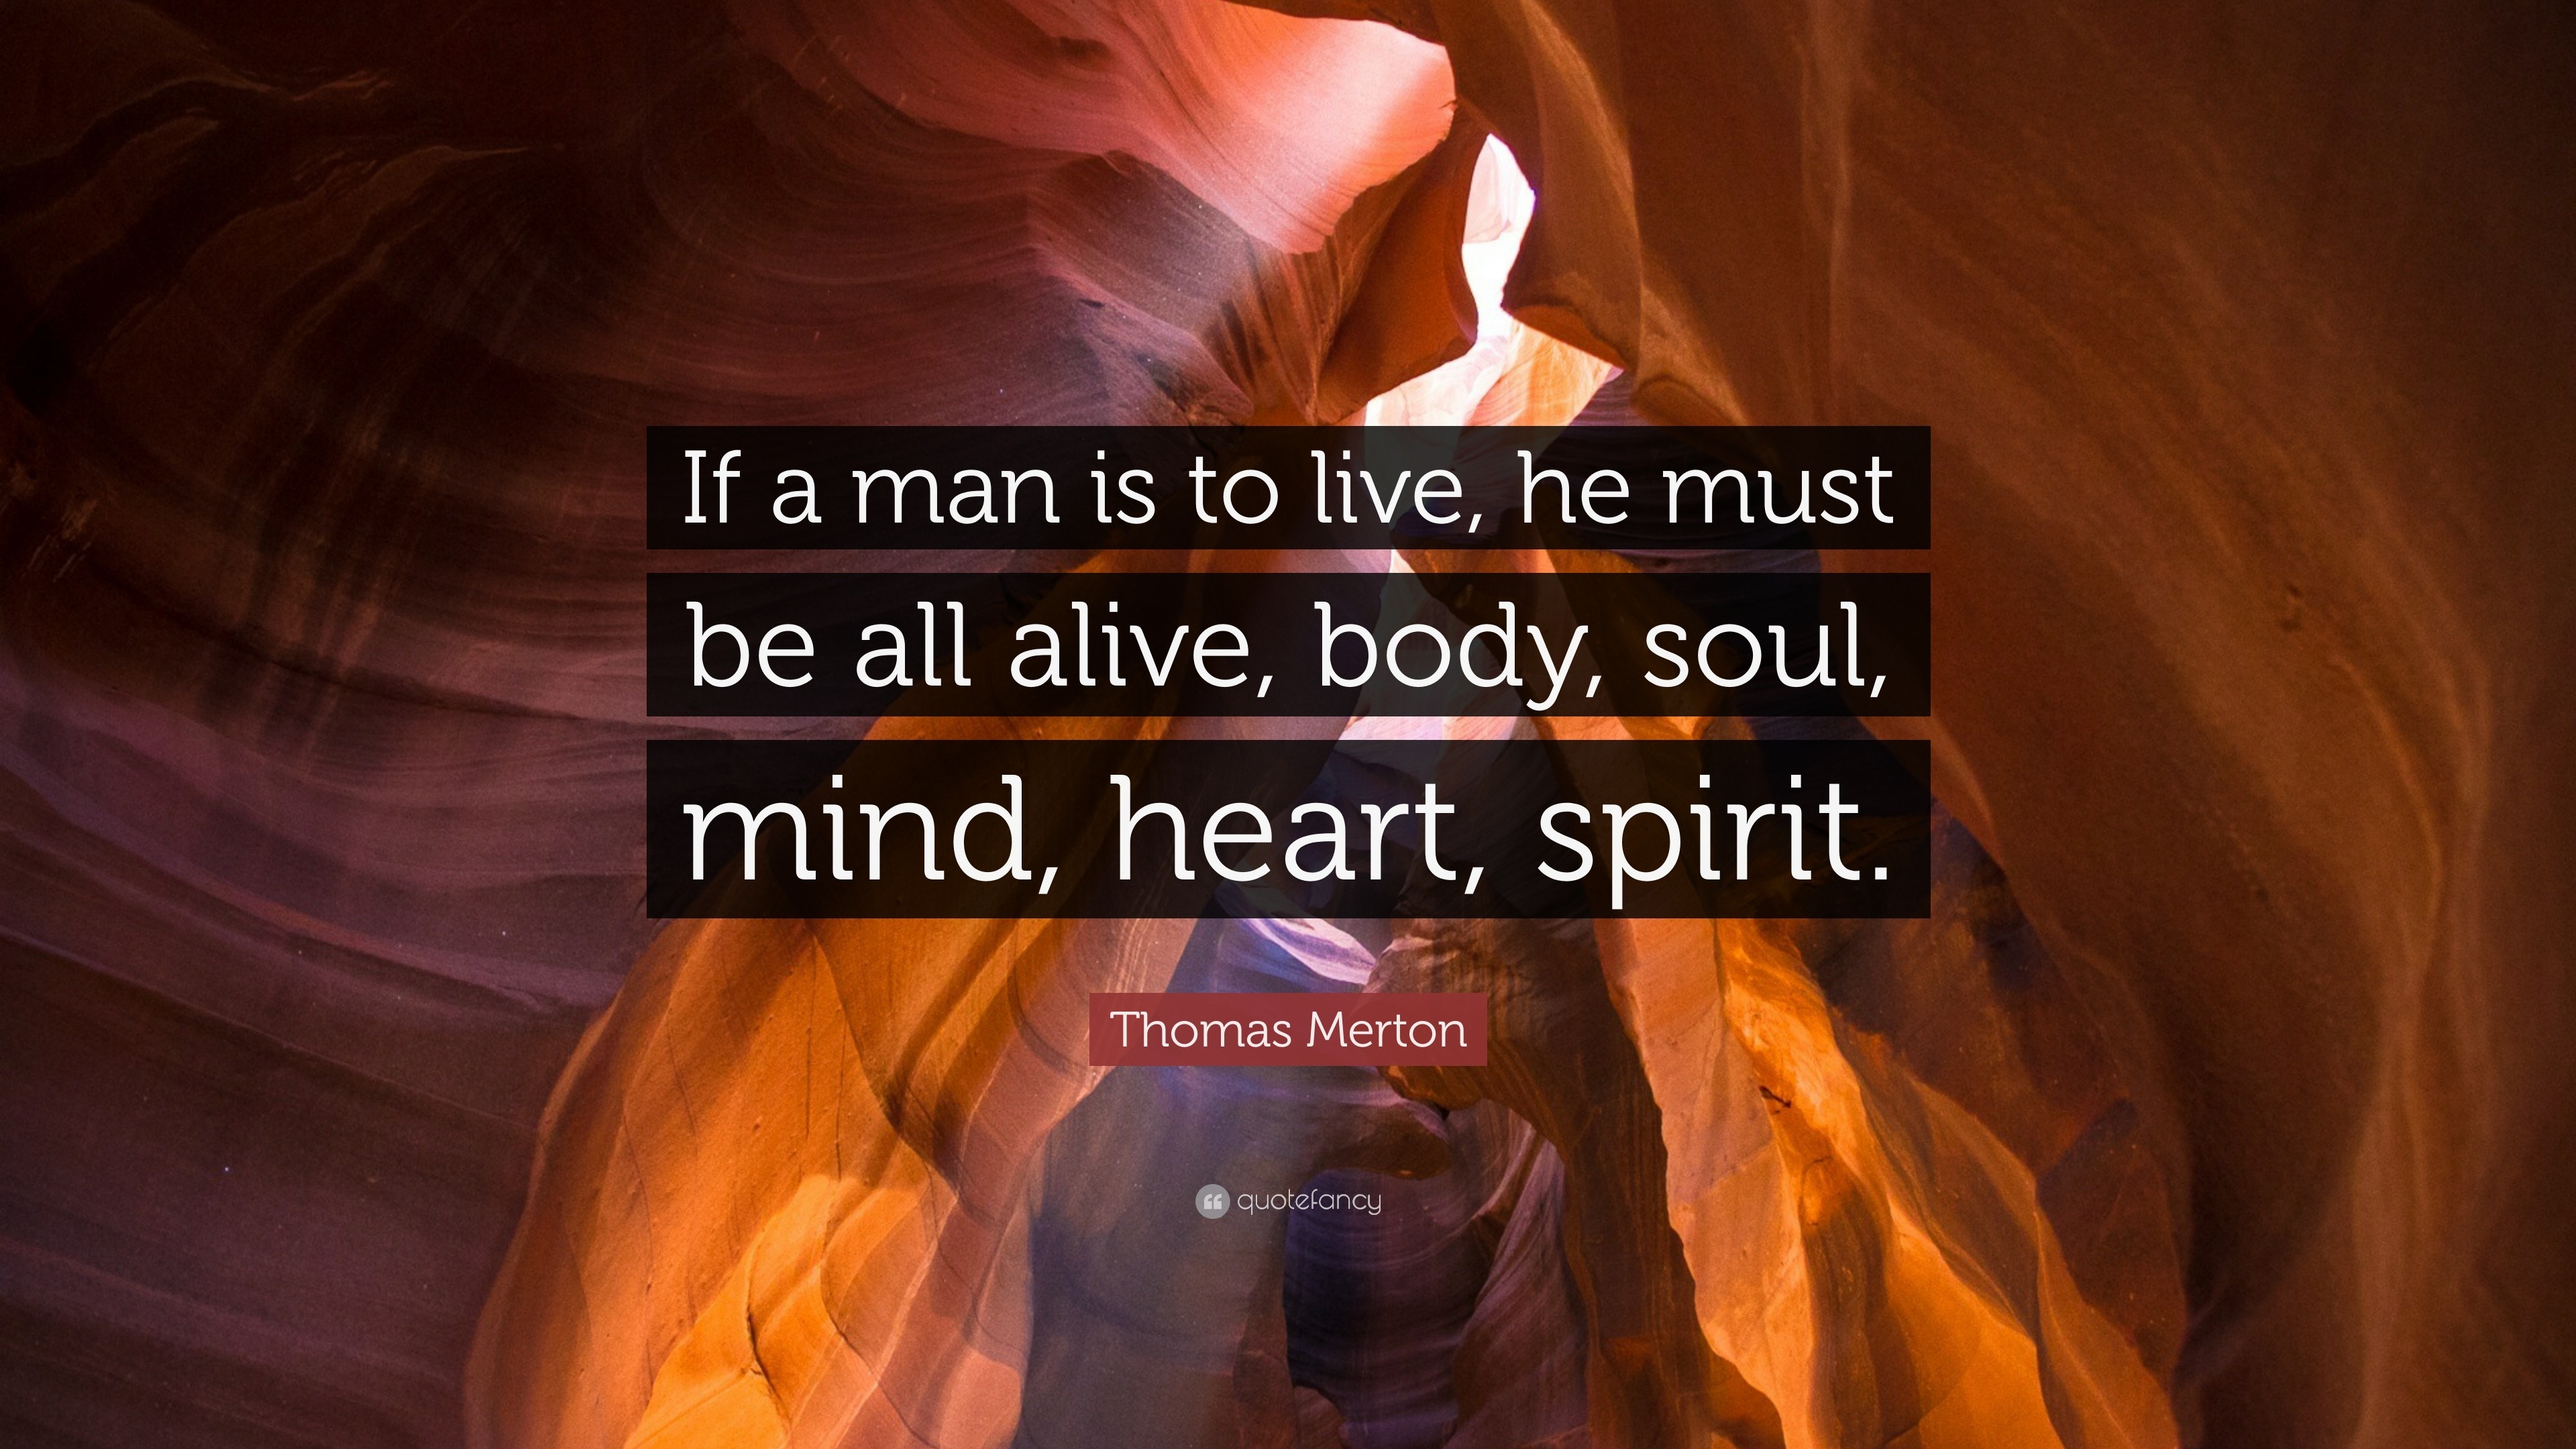 Thomas Merton Quote If A Man Is To Live He Must Be All Alive Body Soul